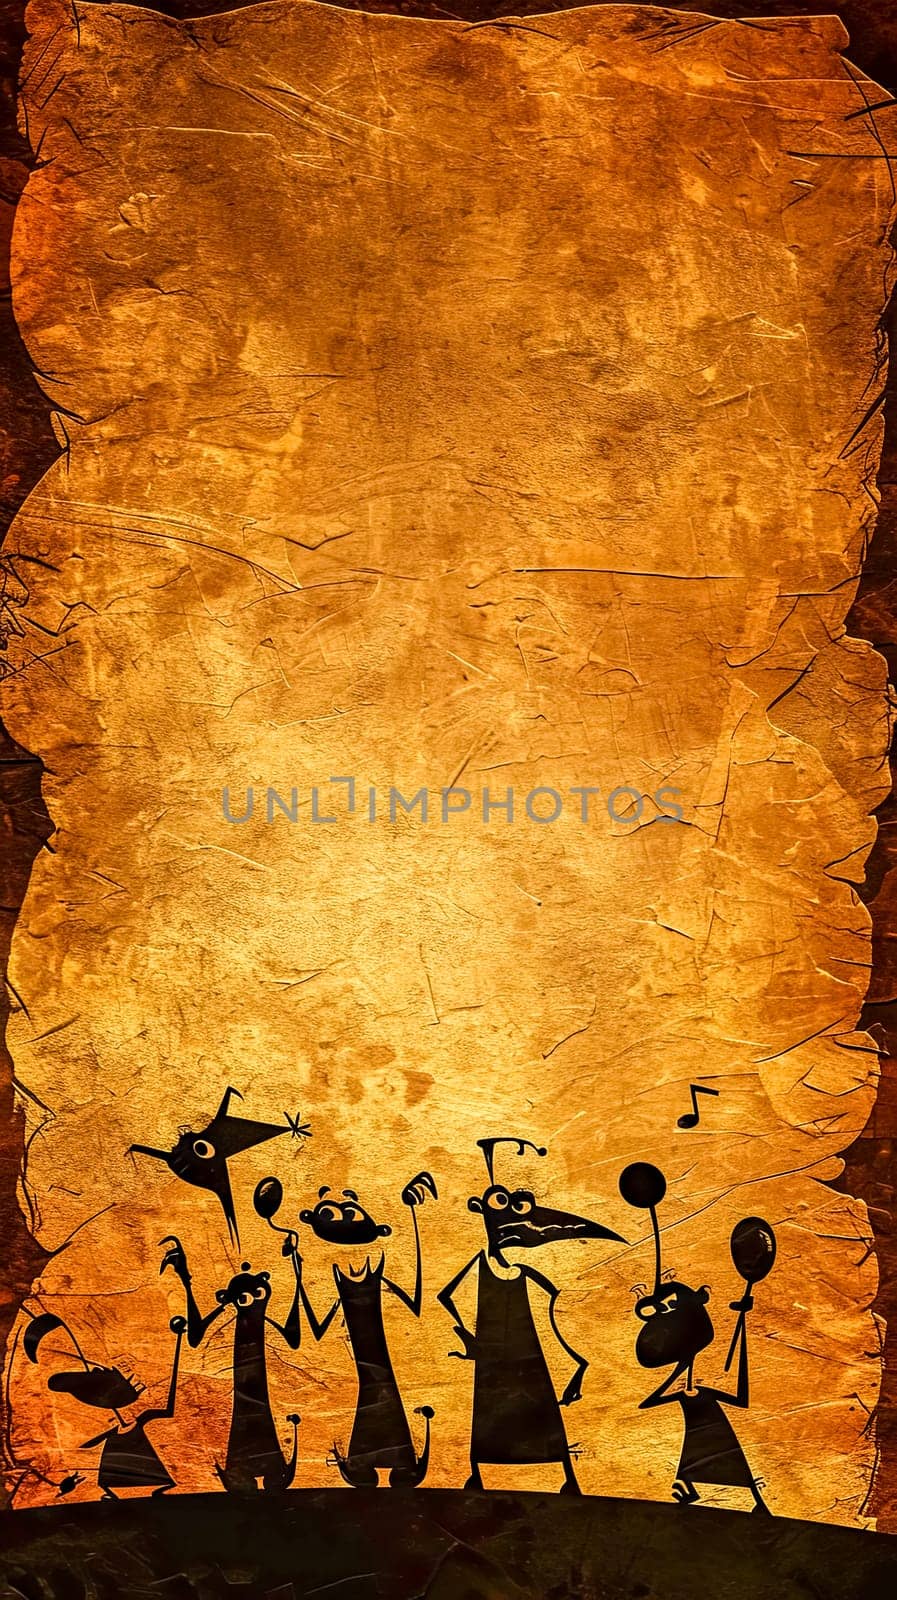 silhouetted cartoon figures on an aged parchment background, reminiscent of ancient cave drawings with a humorous twist. vertical, copy space